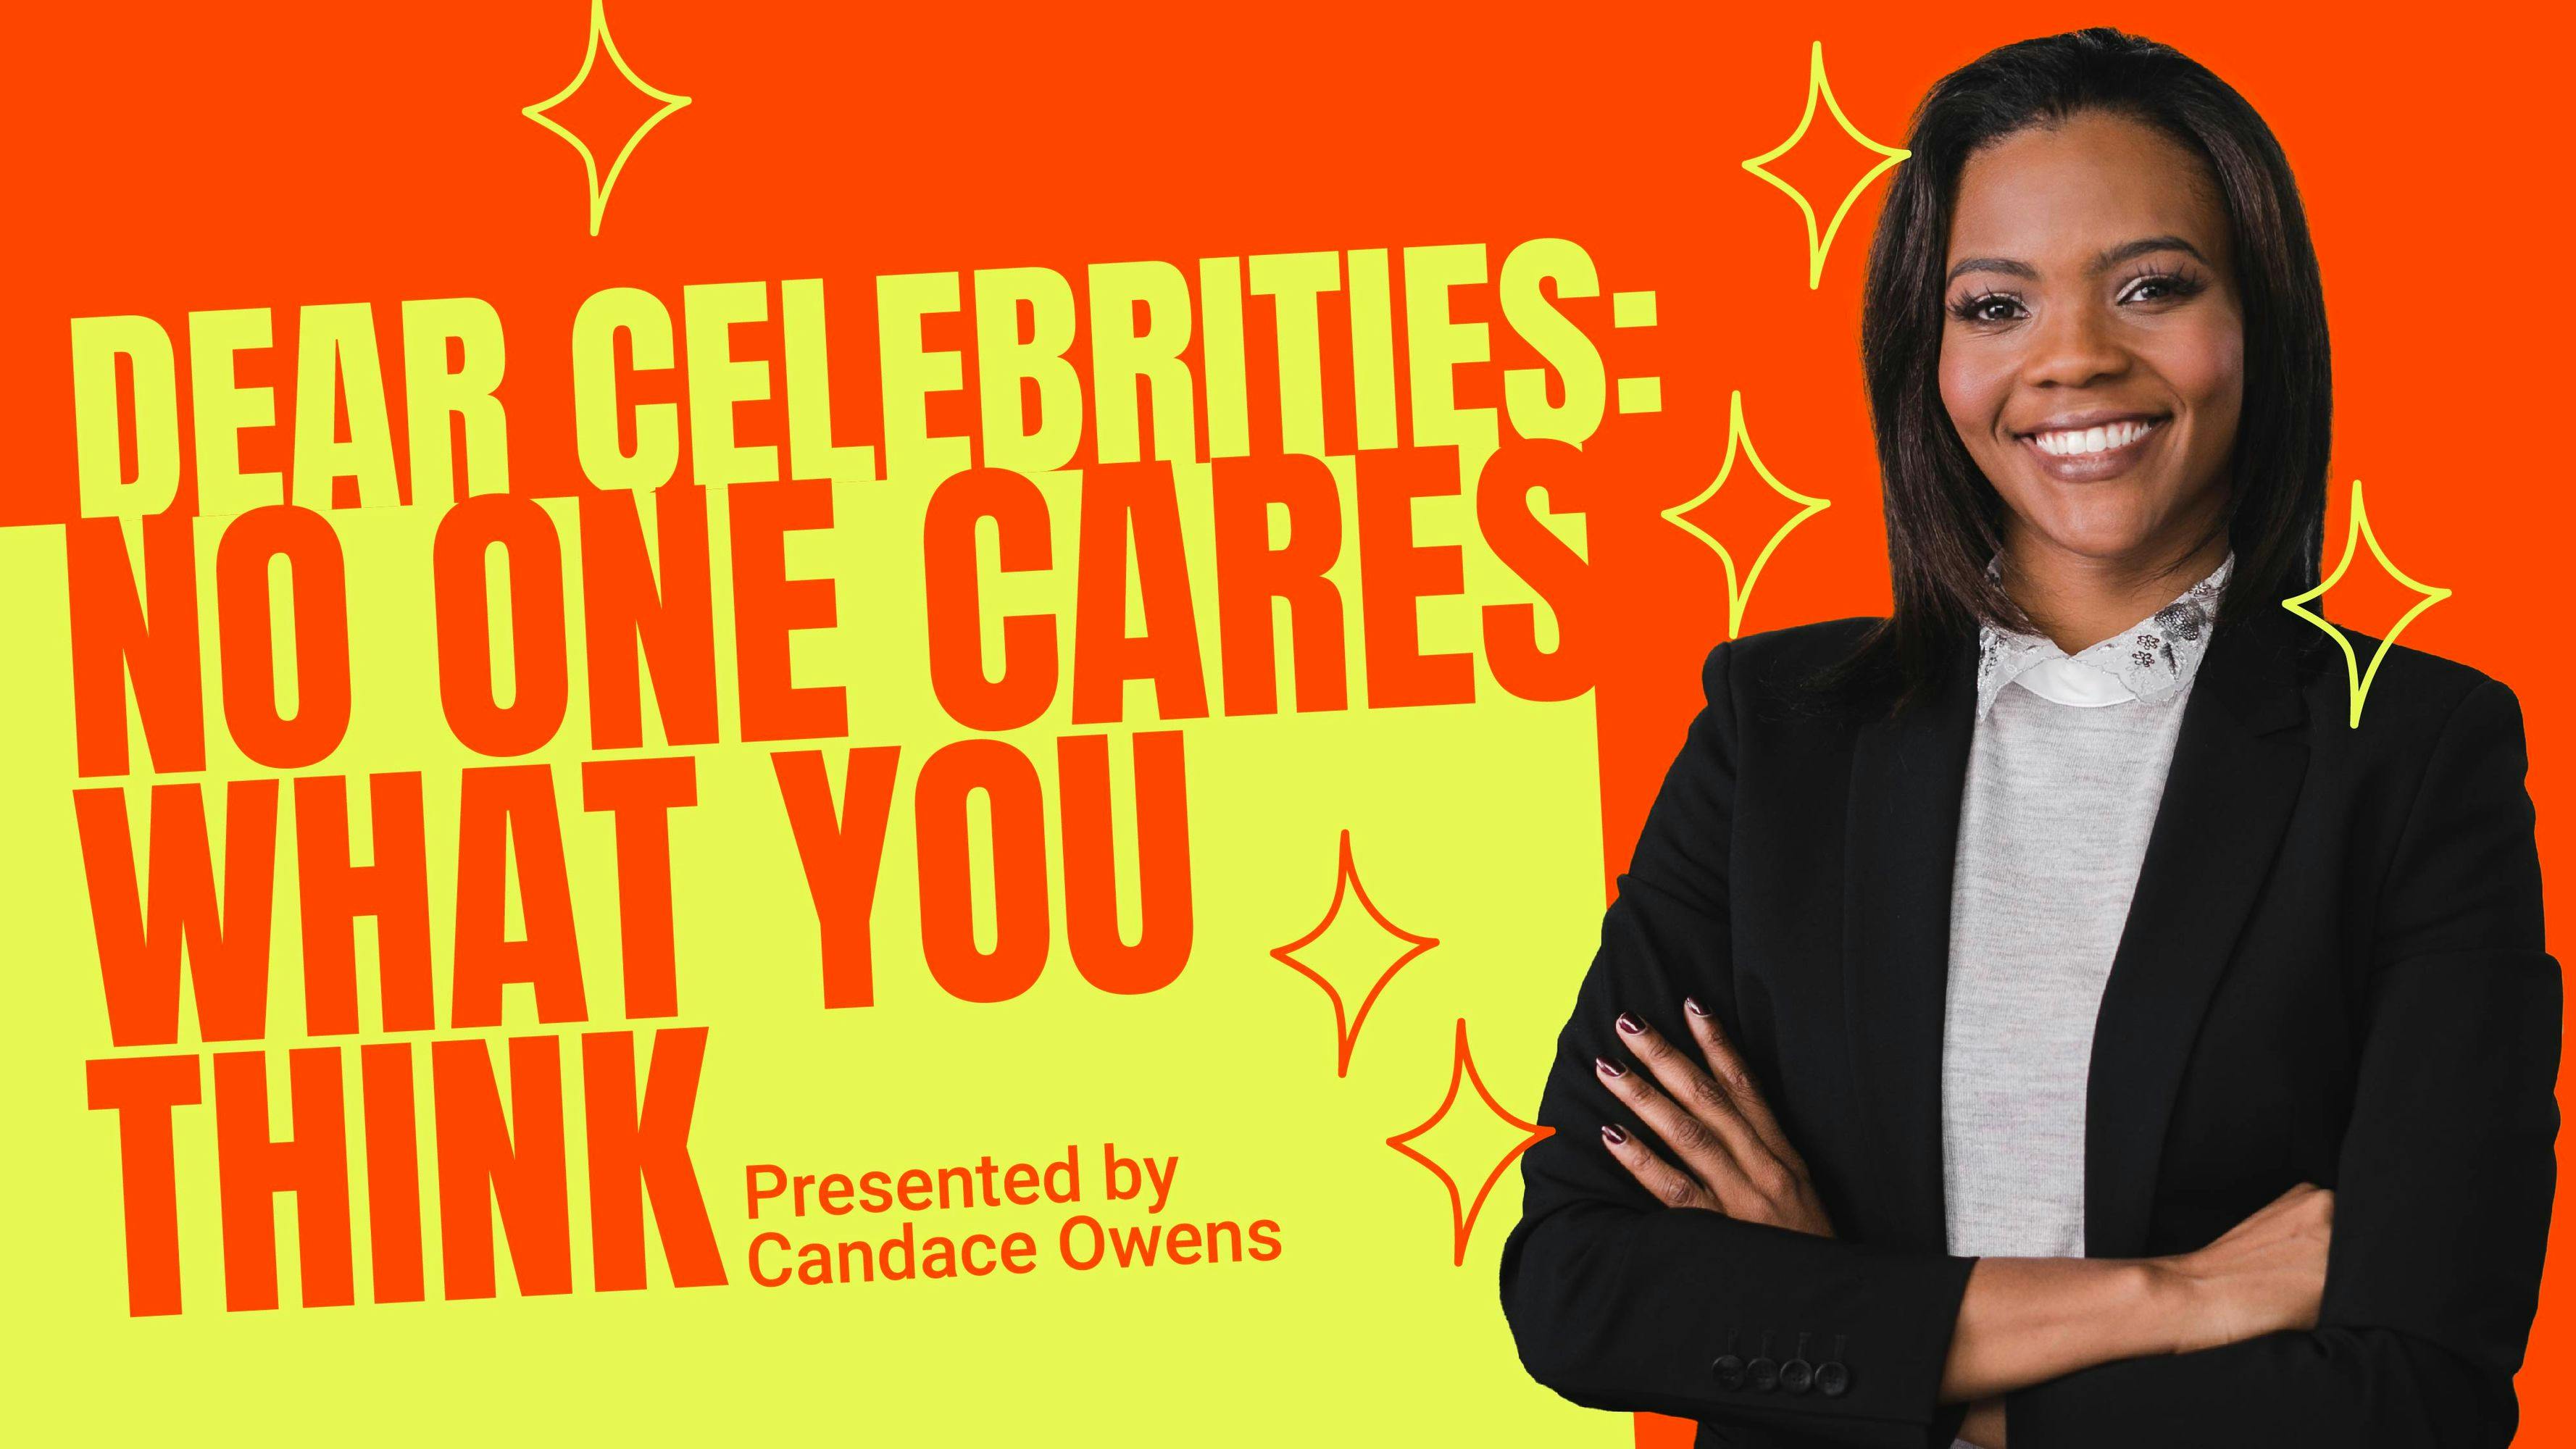 Dear Celebrities, No One Cares What You Think